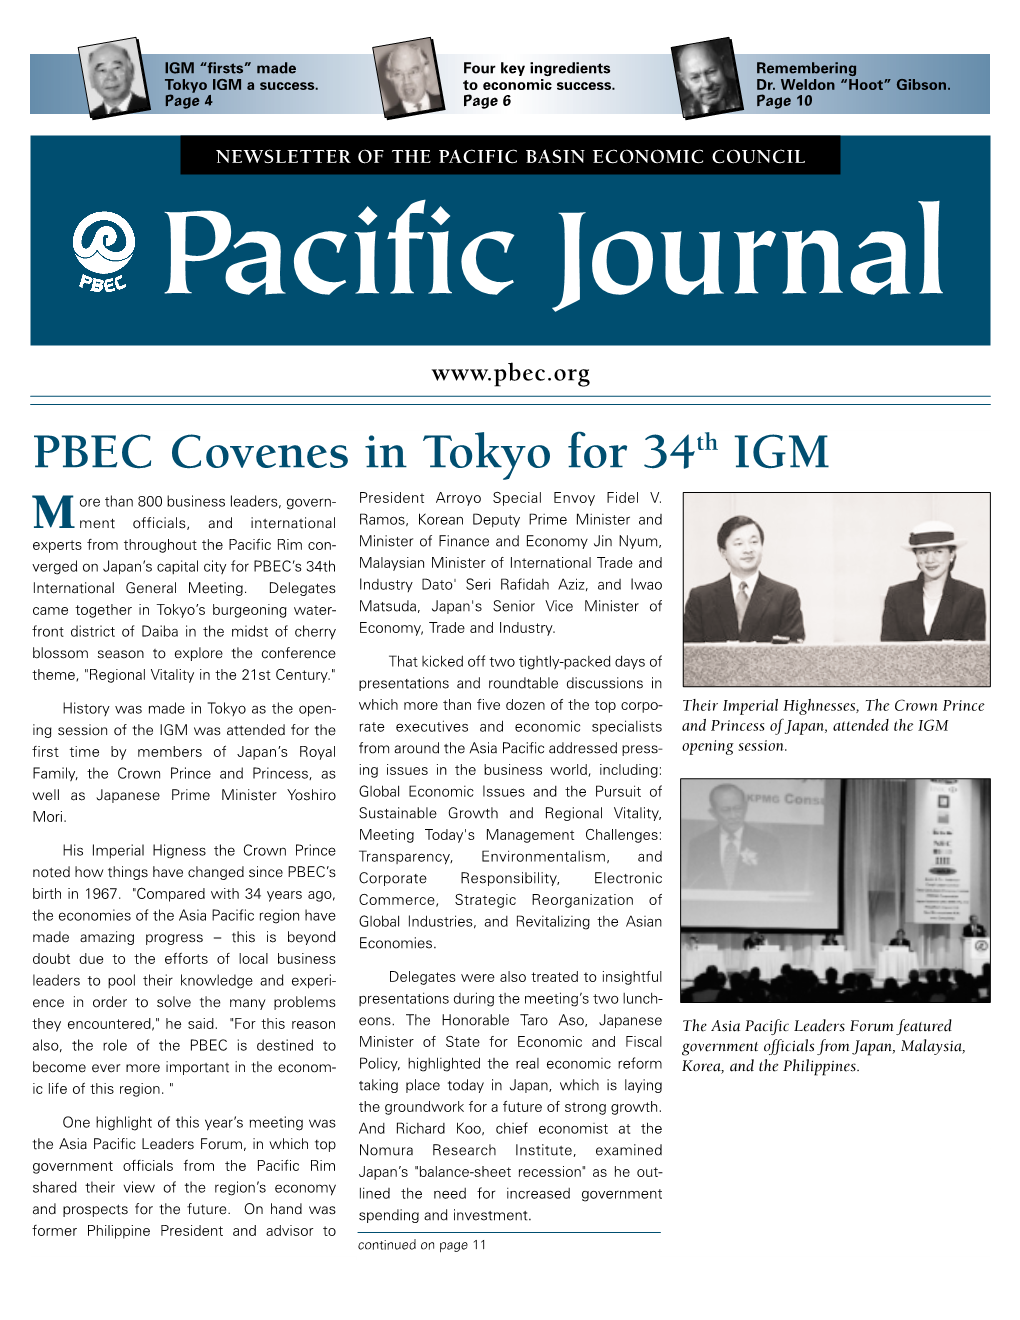 PBEC Covenes in Tokyo for 34Th IGM Ore Than 800 Business Leaders, Govern- President Arroyo Special Envoy Fidel V